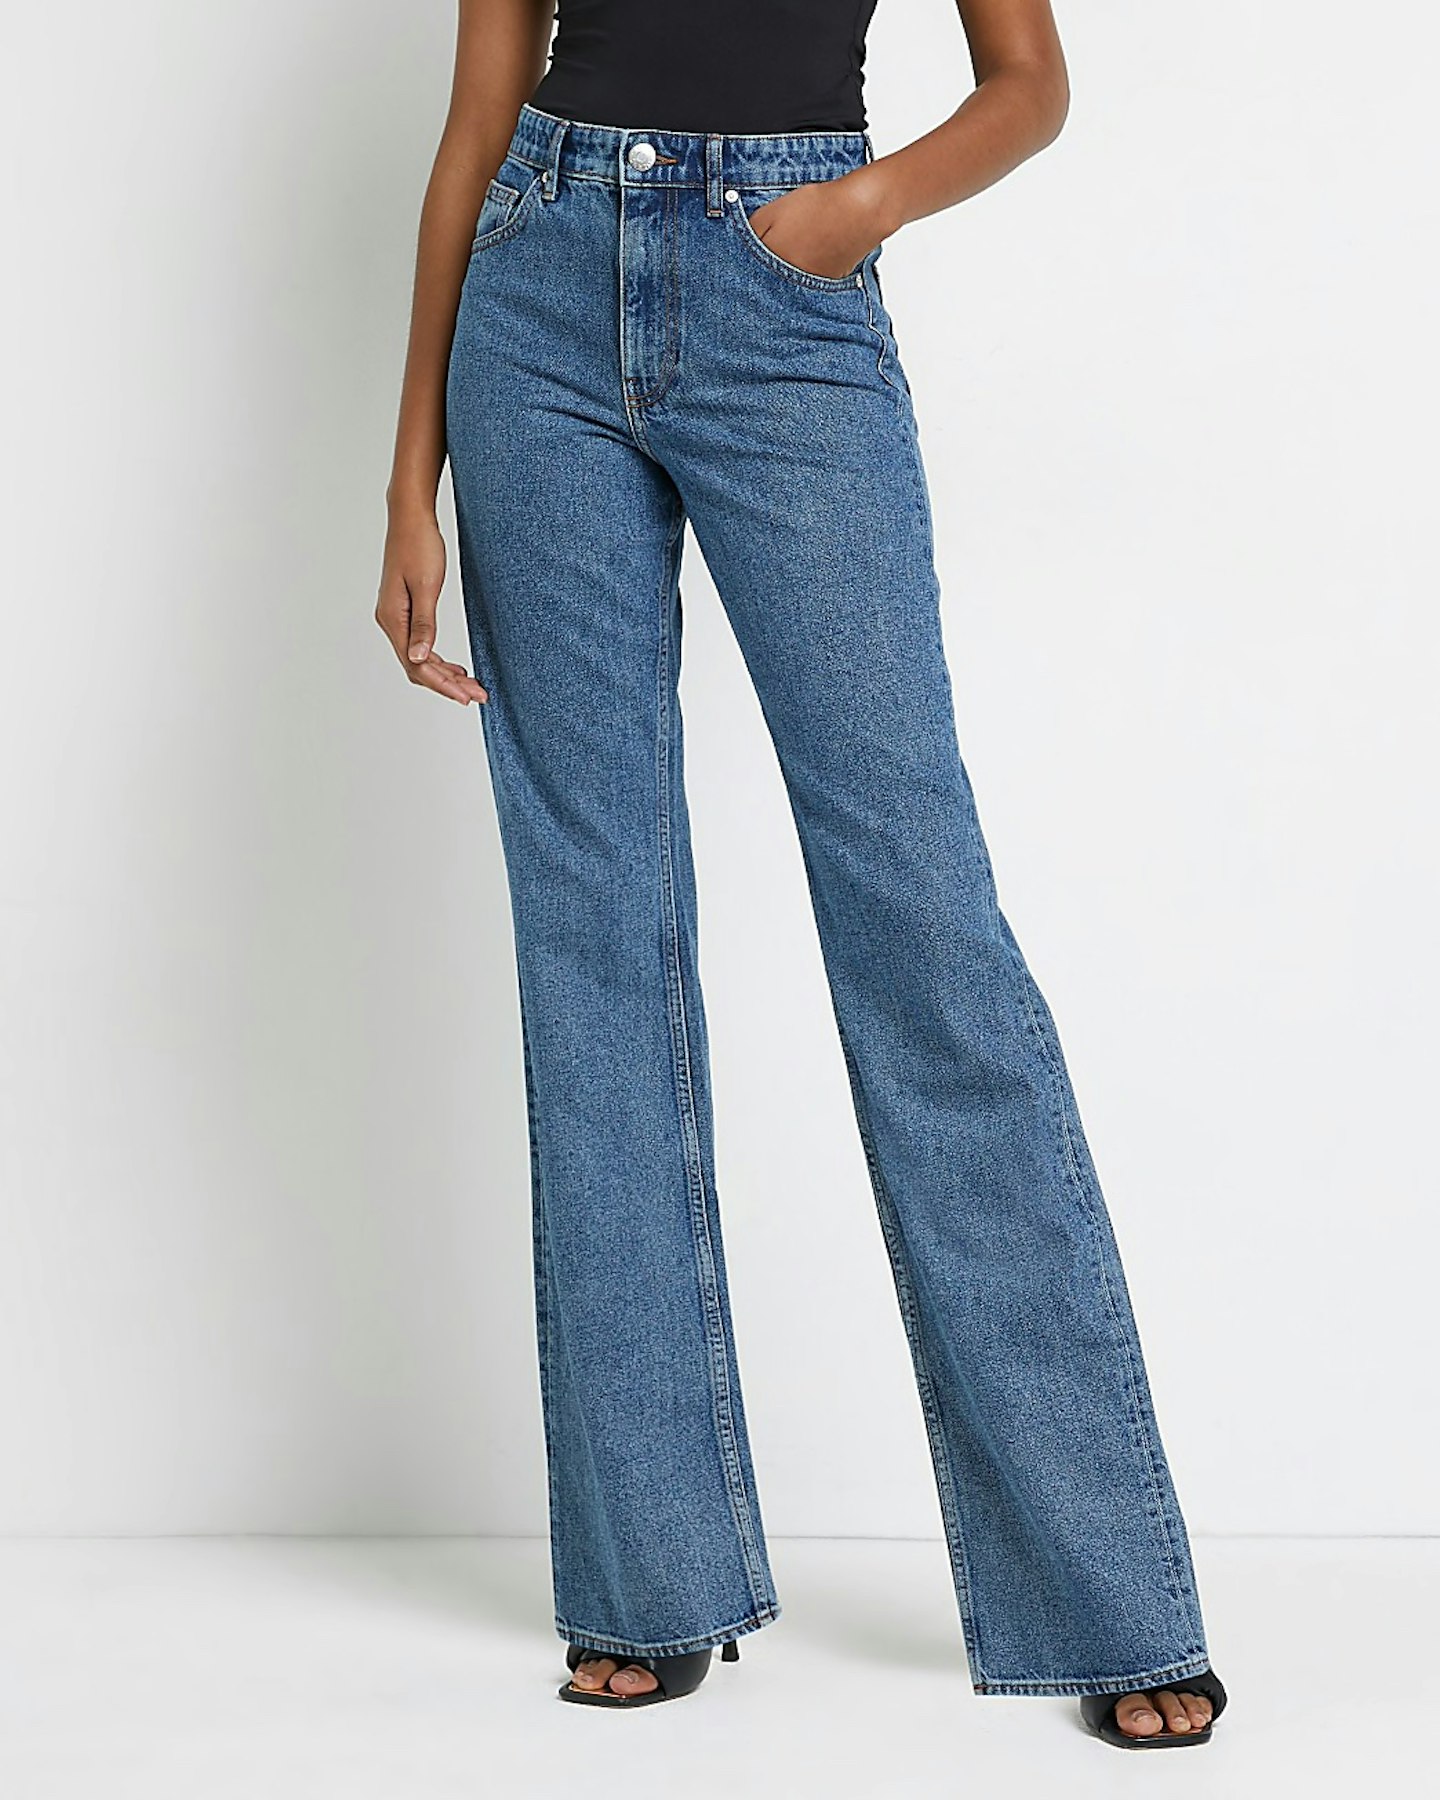 river island best buys Blue High Waist Straight Jeans, £40